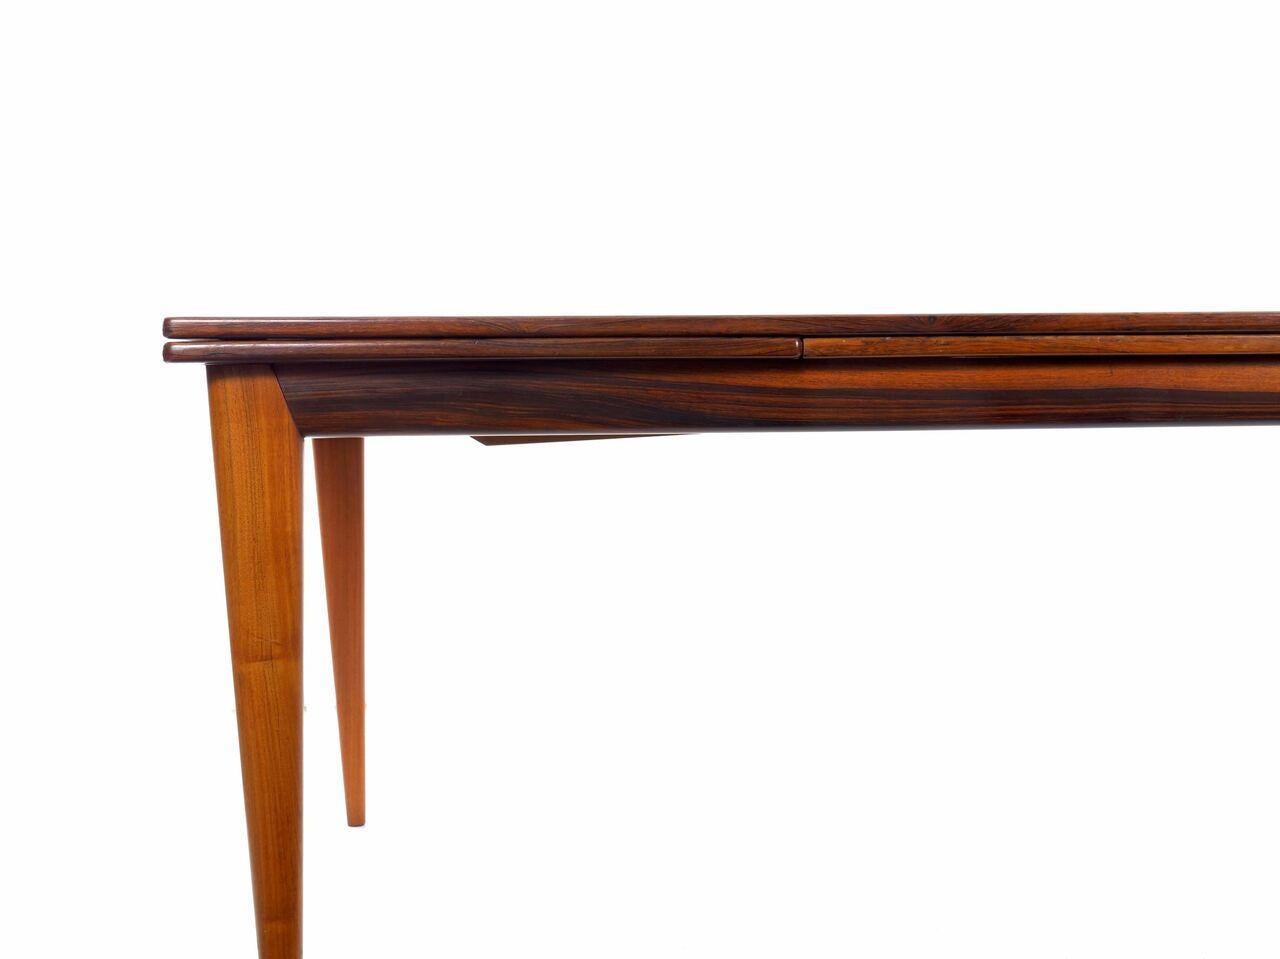 Danish Mid-Century Modern Rosewood Dining Table by Niels Møller, Model No. 254 11